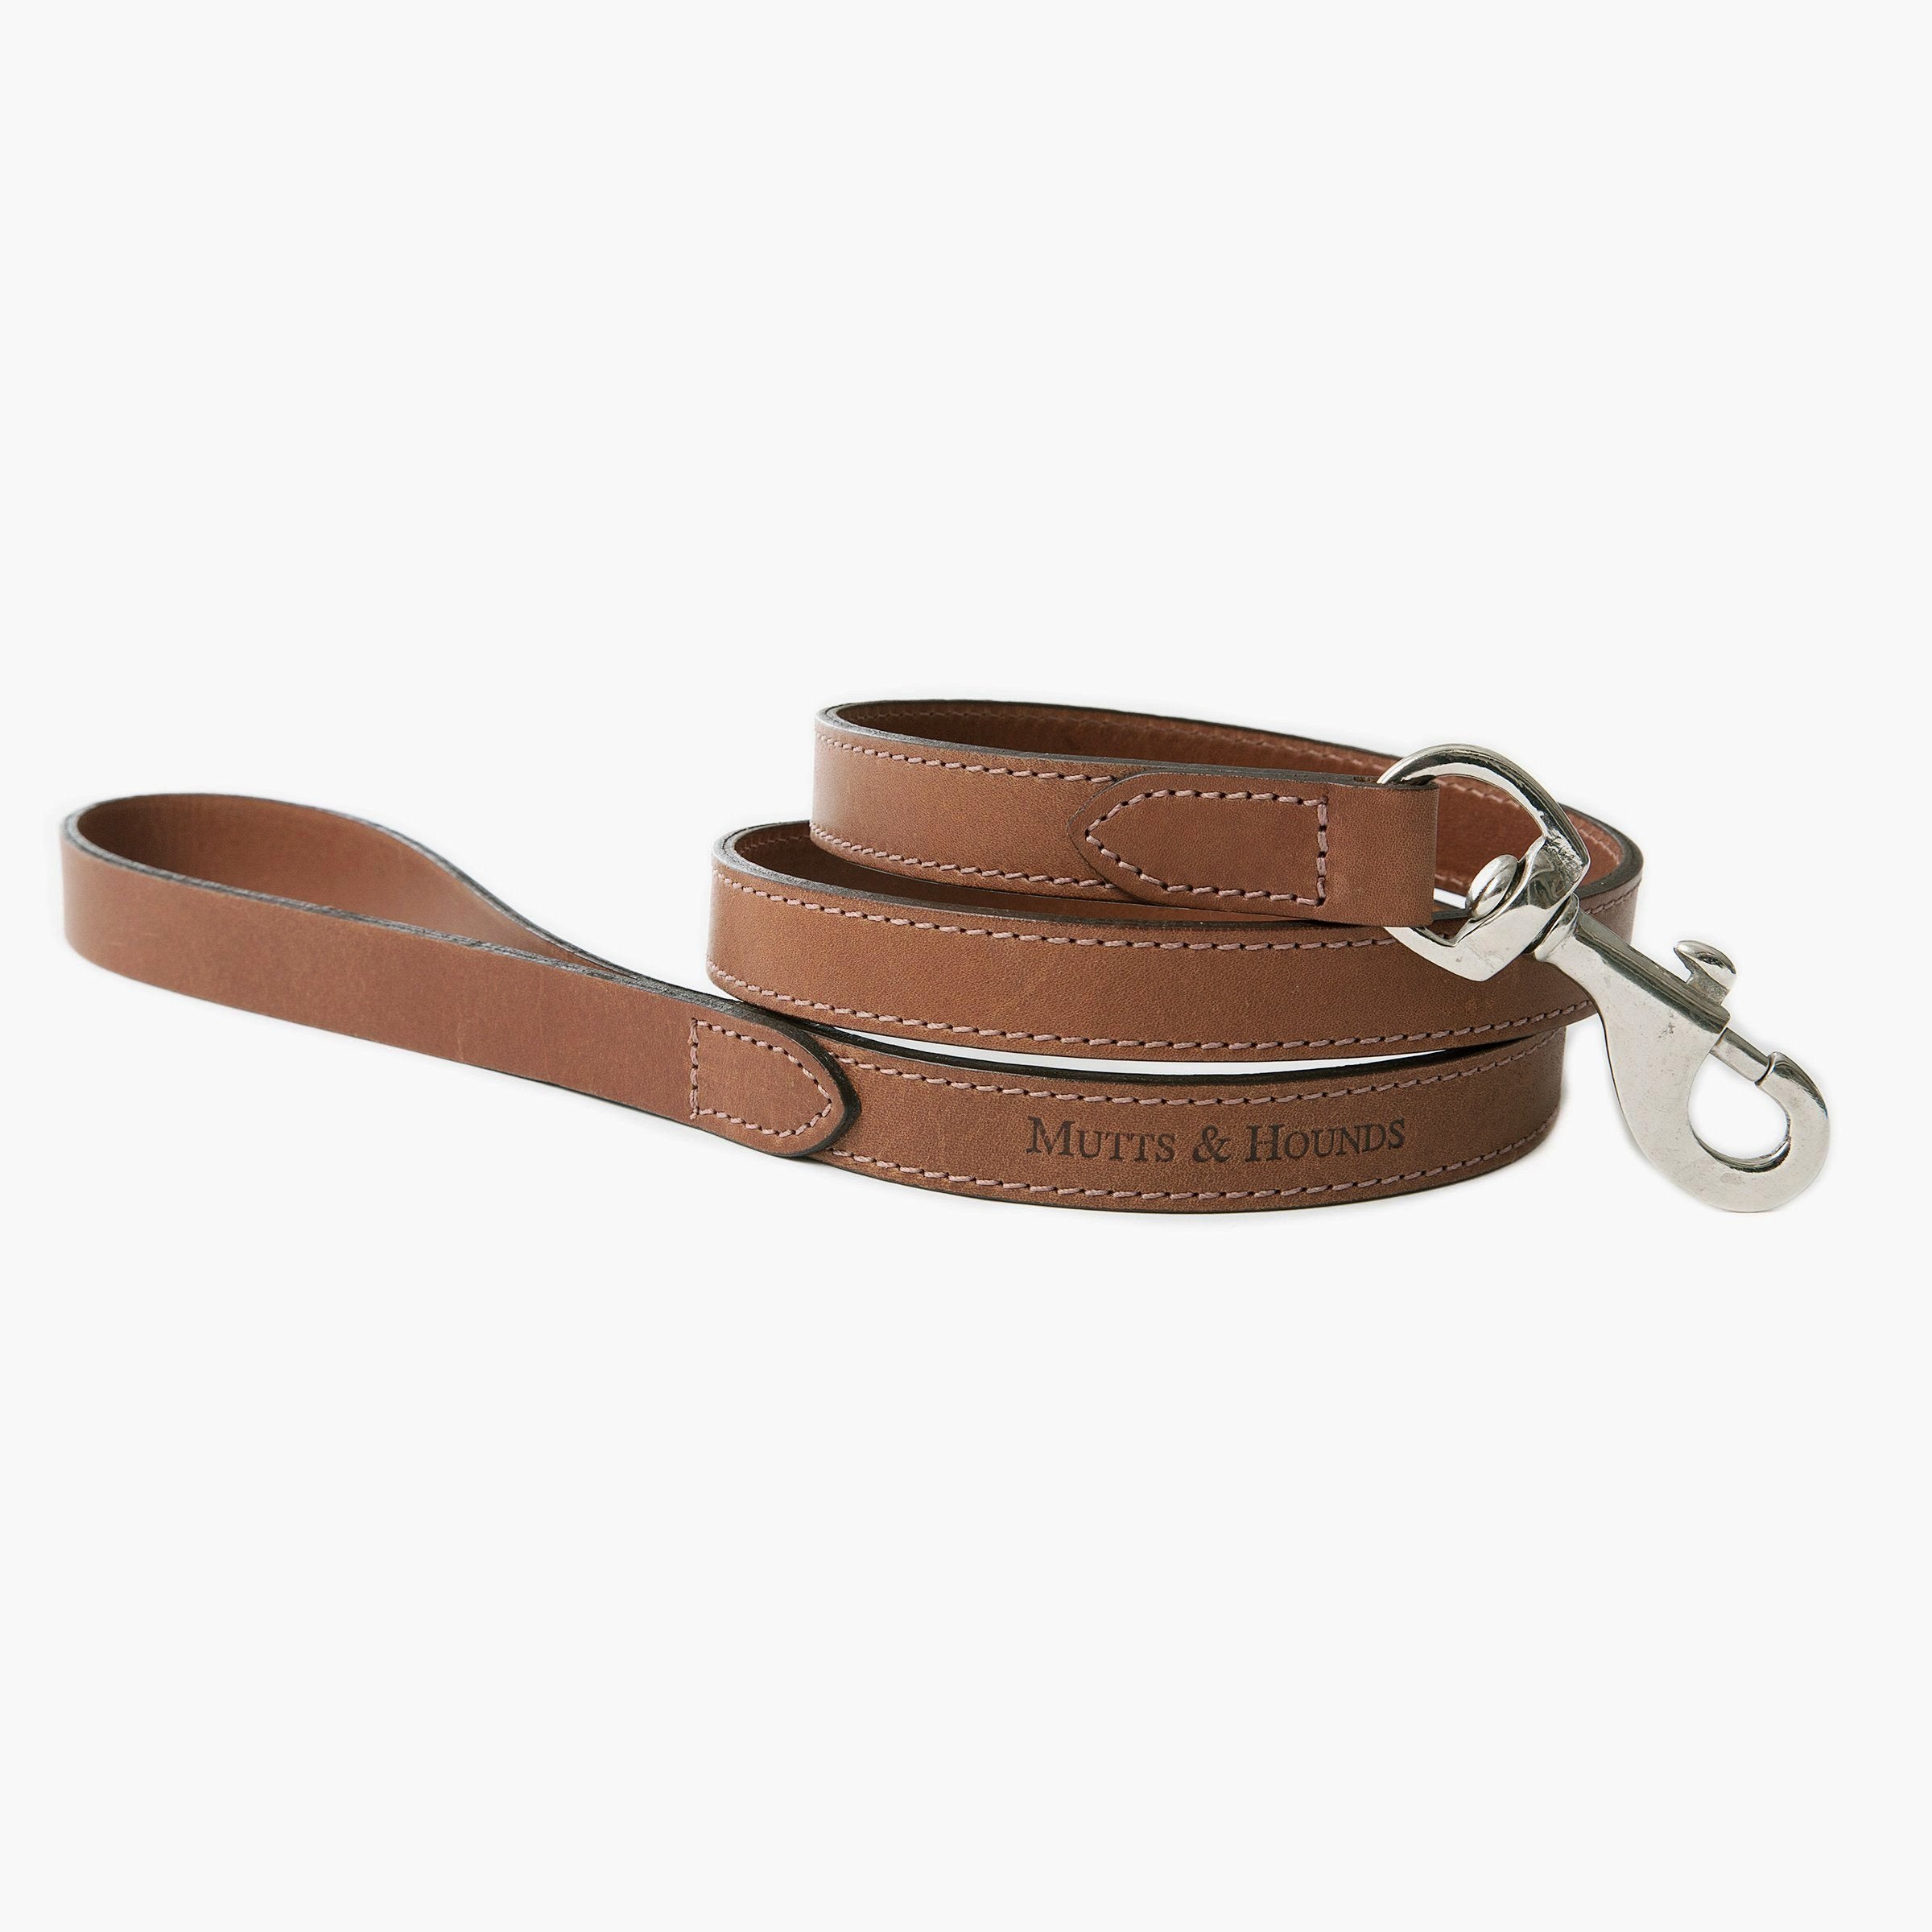 Tweed & Leather Dog Leash - Balmoral - NEW PETS ON THE BLOCK.COM